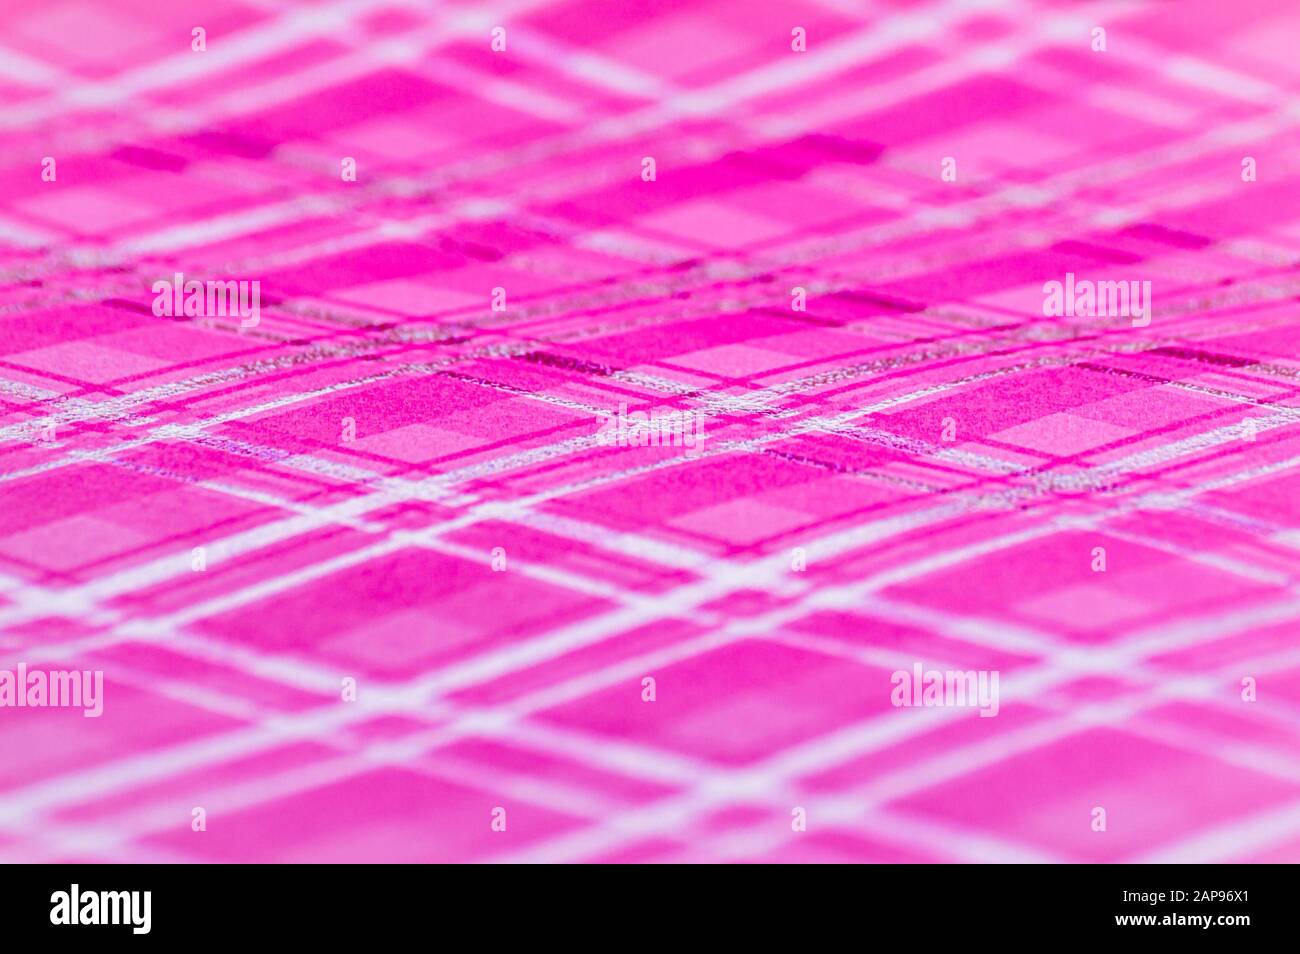 Pink and silver plaid. Background graphic Stock Photo